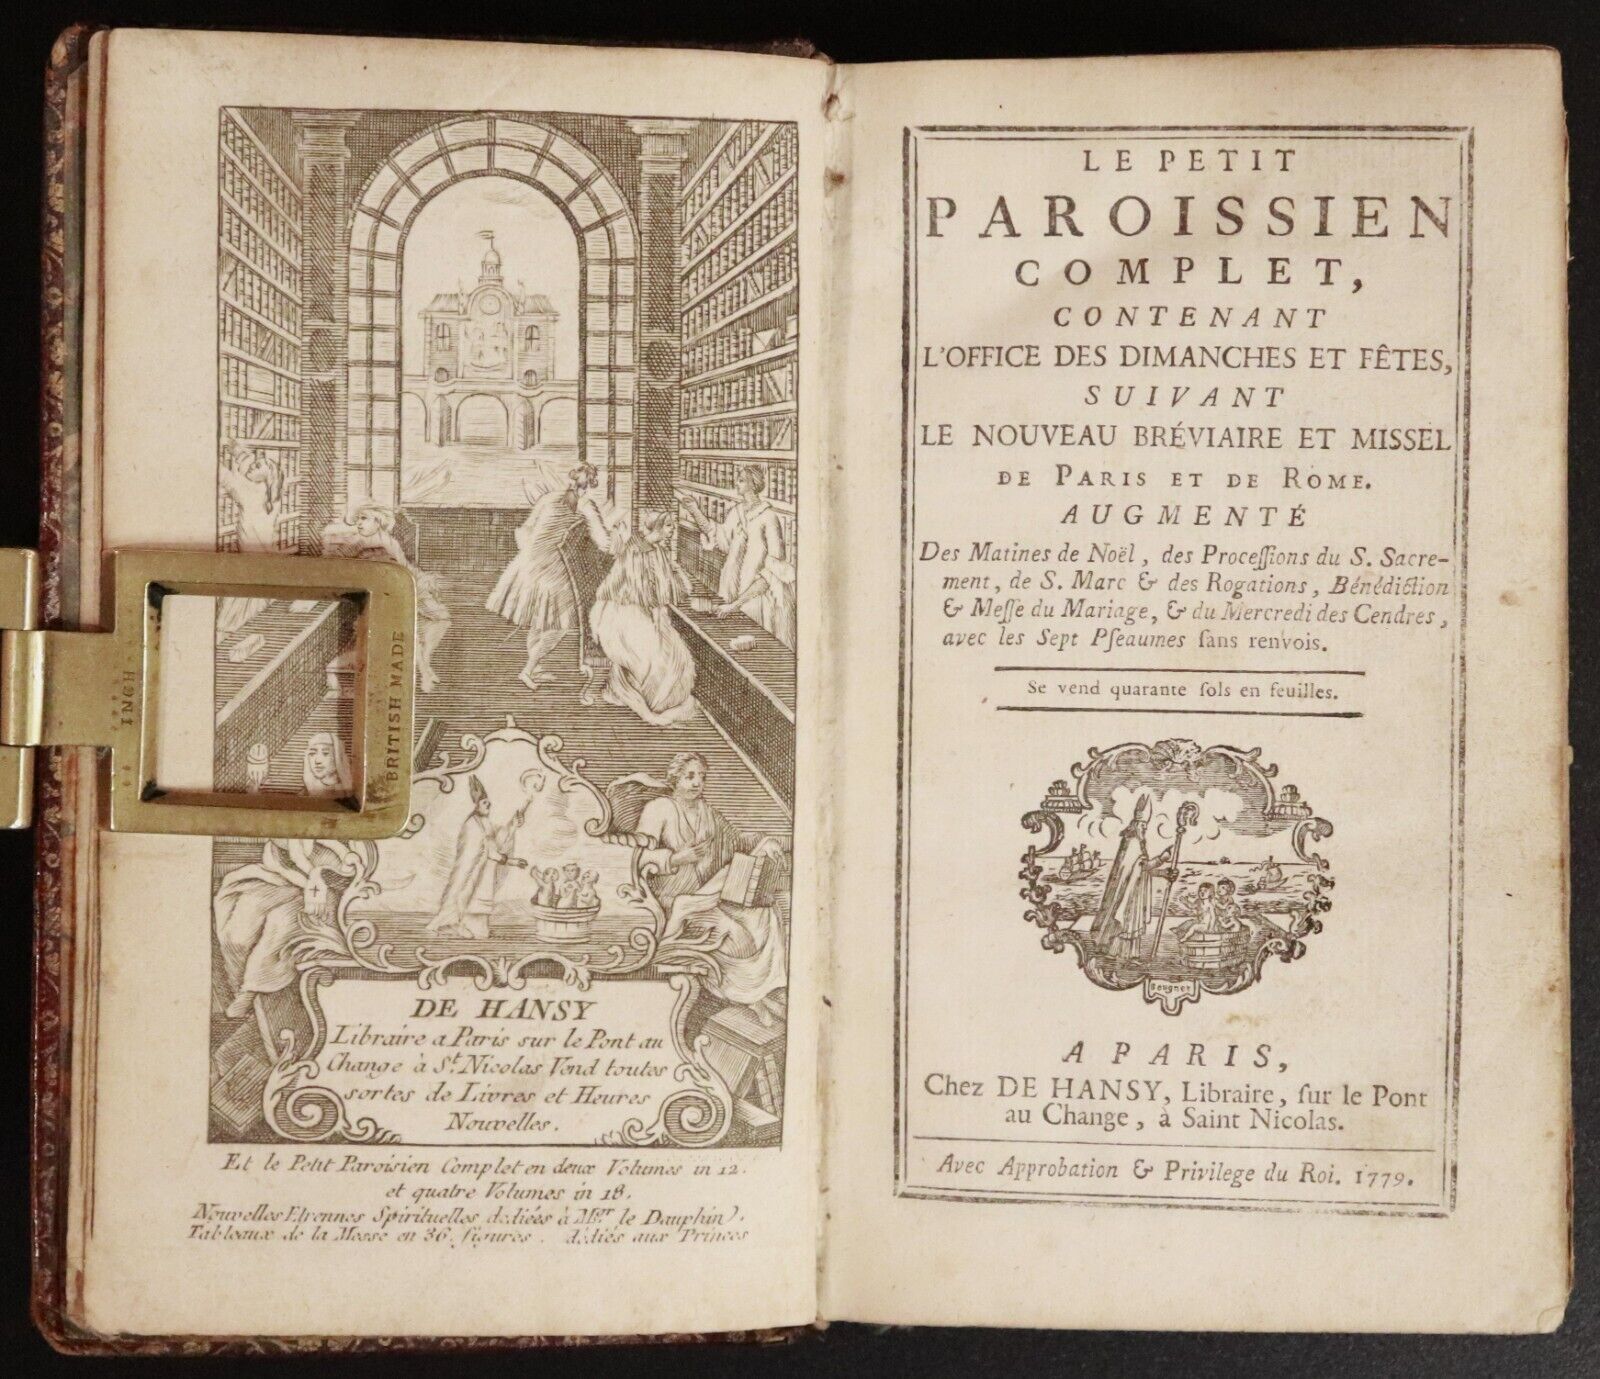 1779 Le Petit Paroissien Complet French Antiquarian Book With Engraving - 0